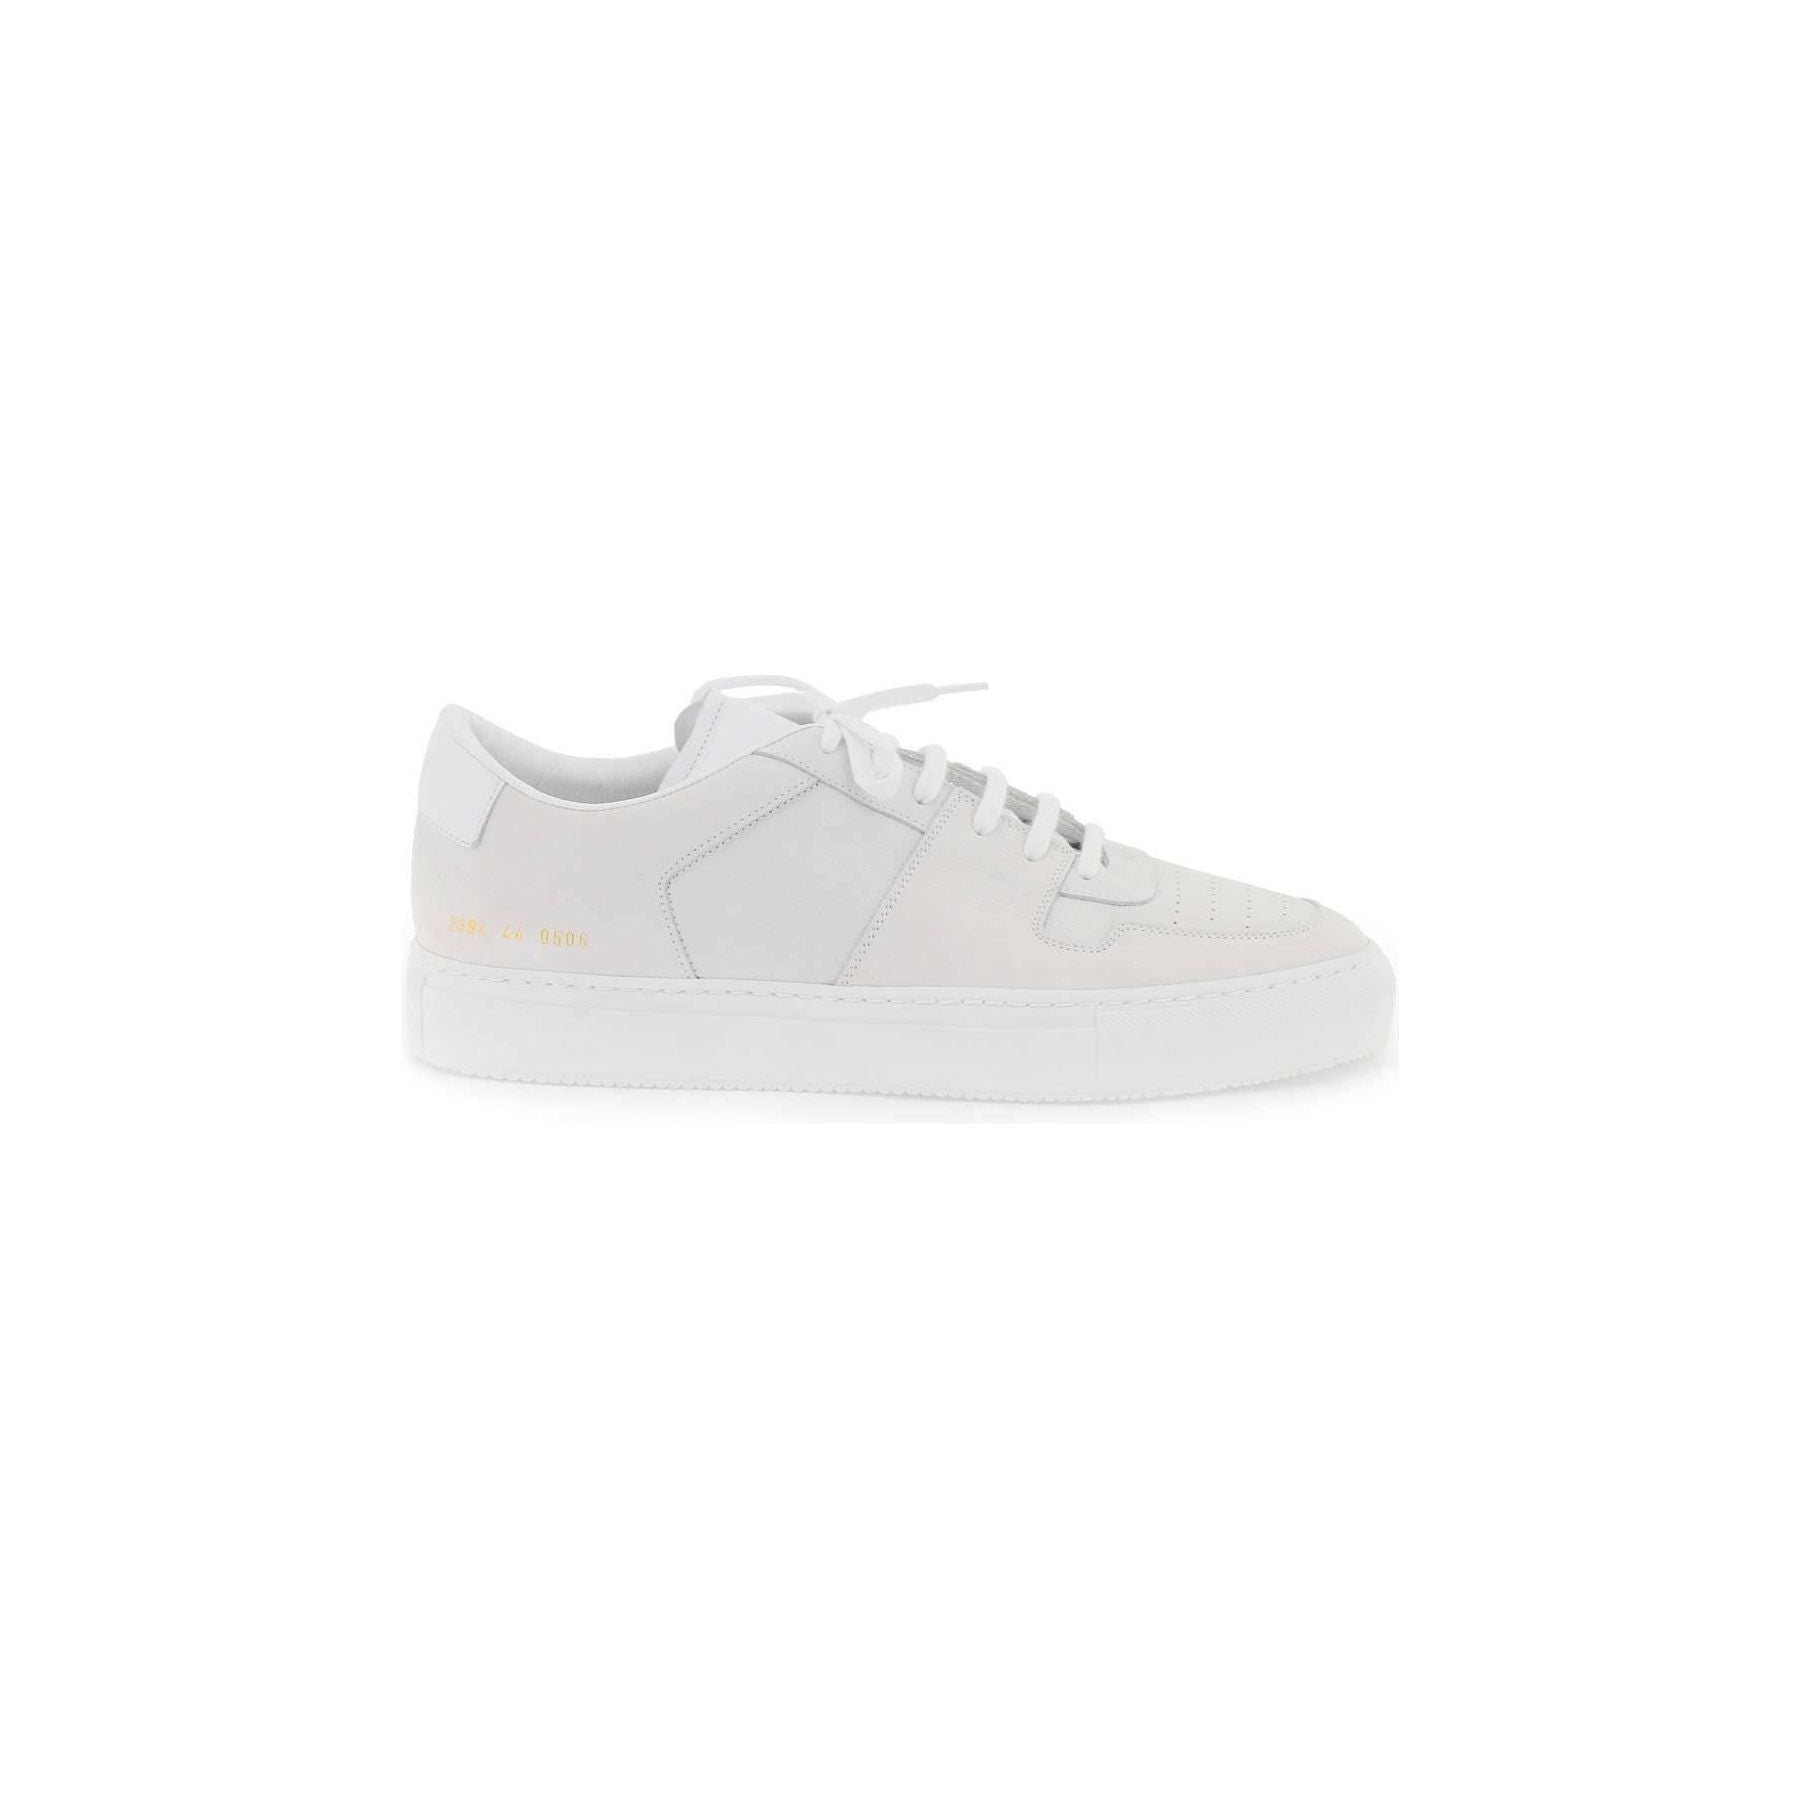 White Decades Low Leather Sneakers COMMON PROJECTS JOHN JULIA.